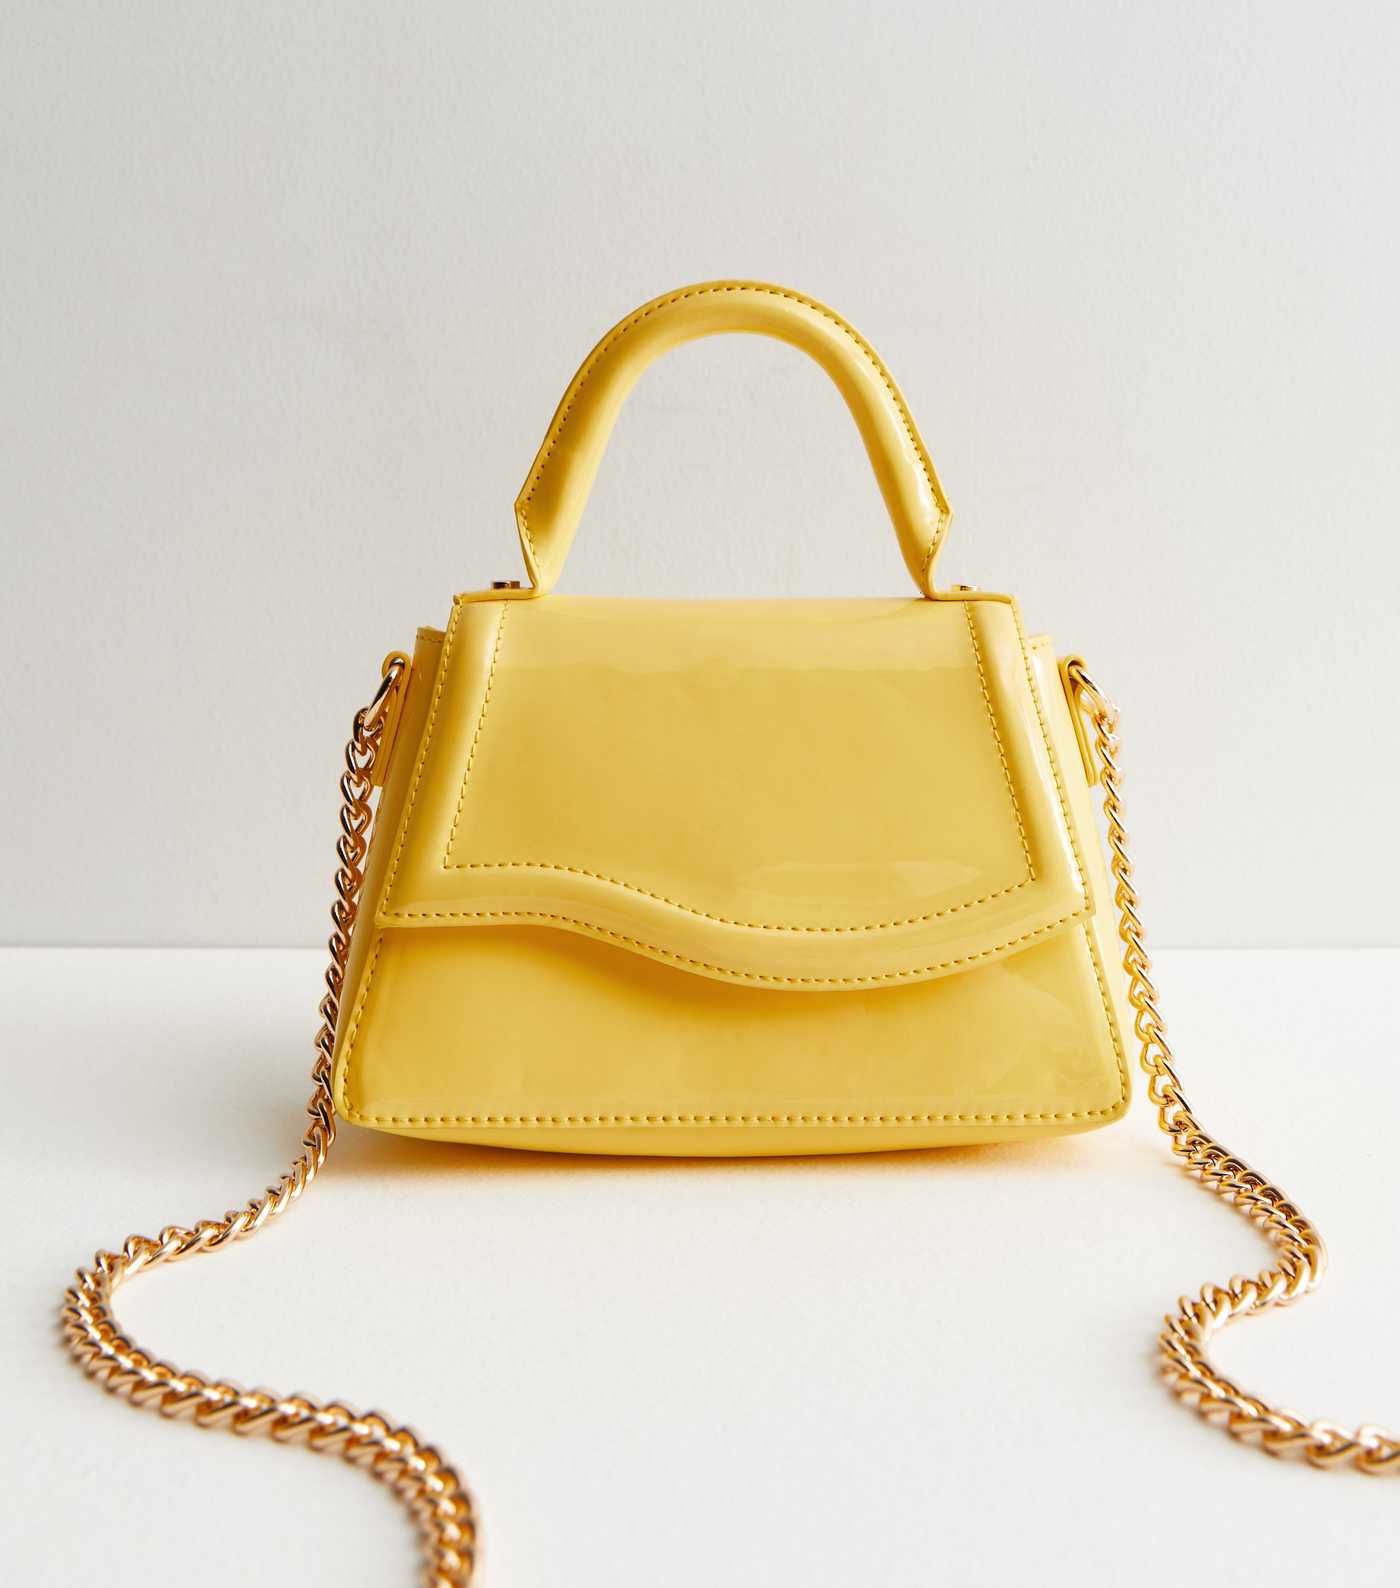 Yellow Patent Top Handle Chain Cross Body Bag
						
						Add to Saved Items
						Remove from S... | New Look (UK)